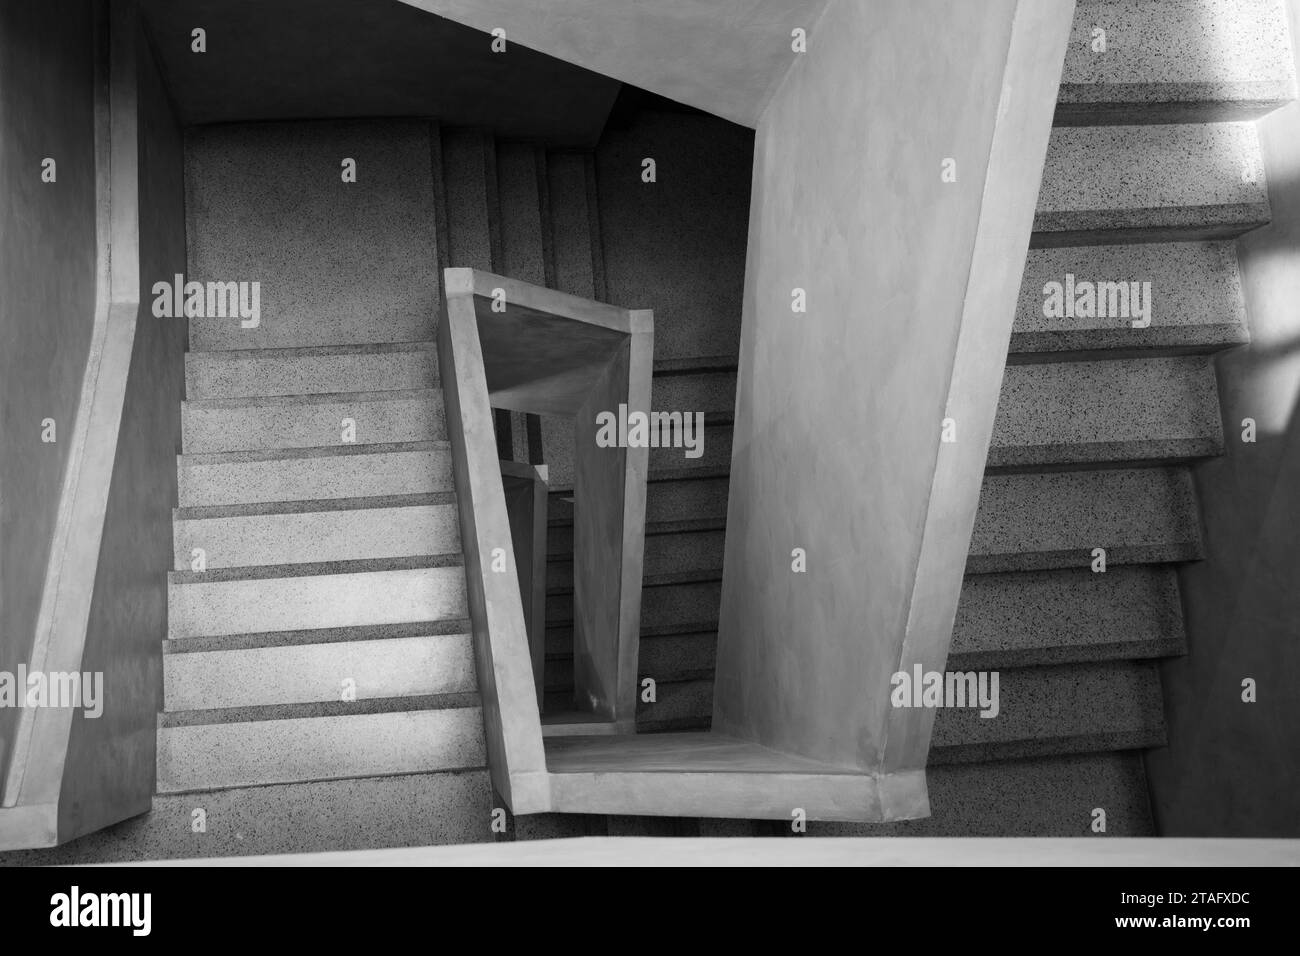 Black and white, Top diminishing perspective view of simple modern concrete staircase. Stock Photo